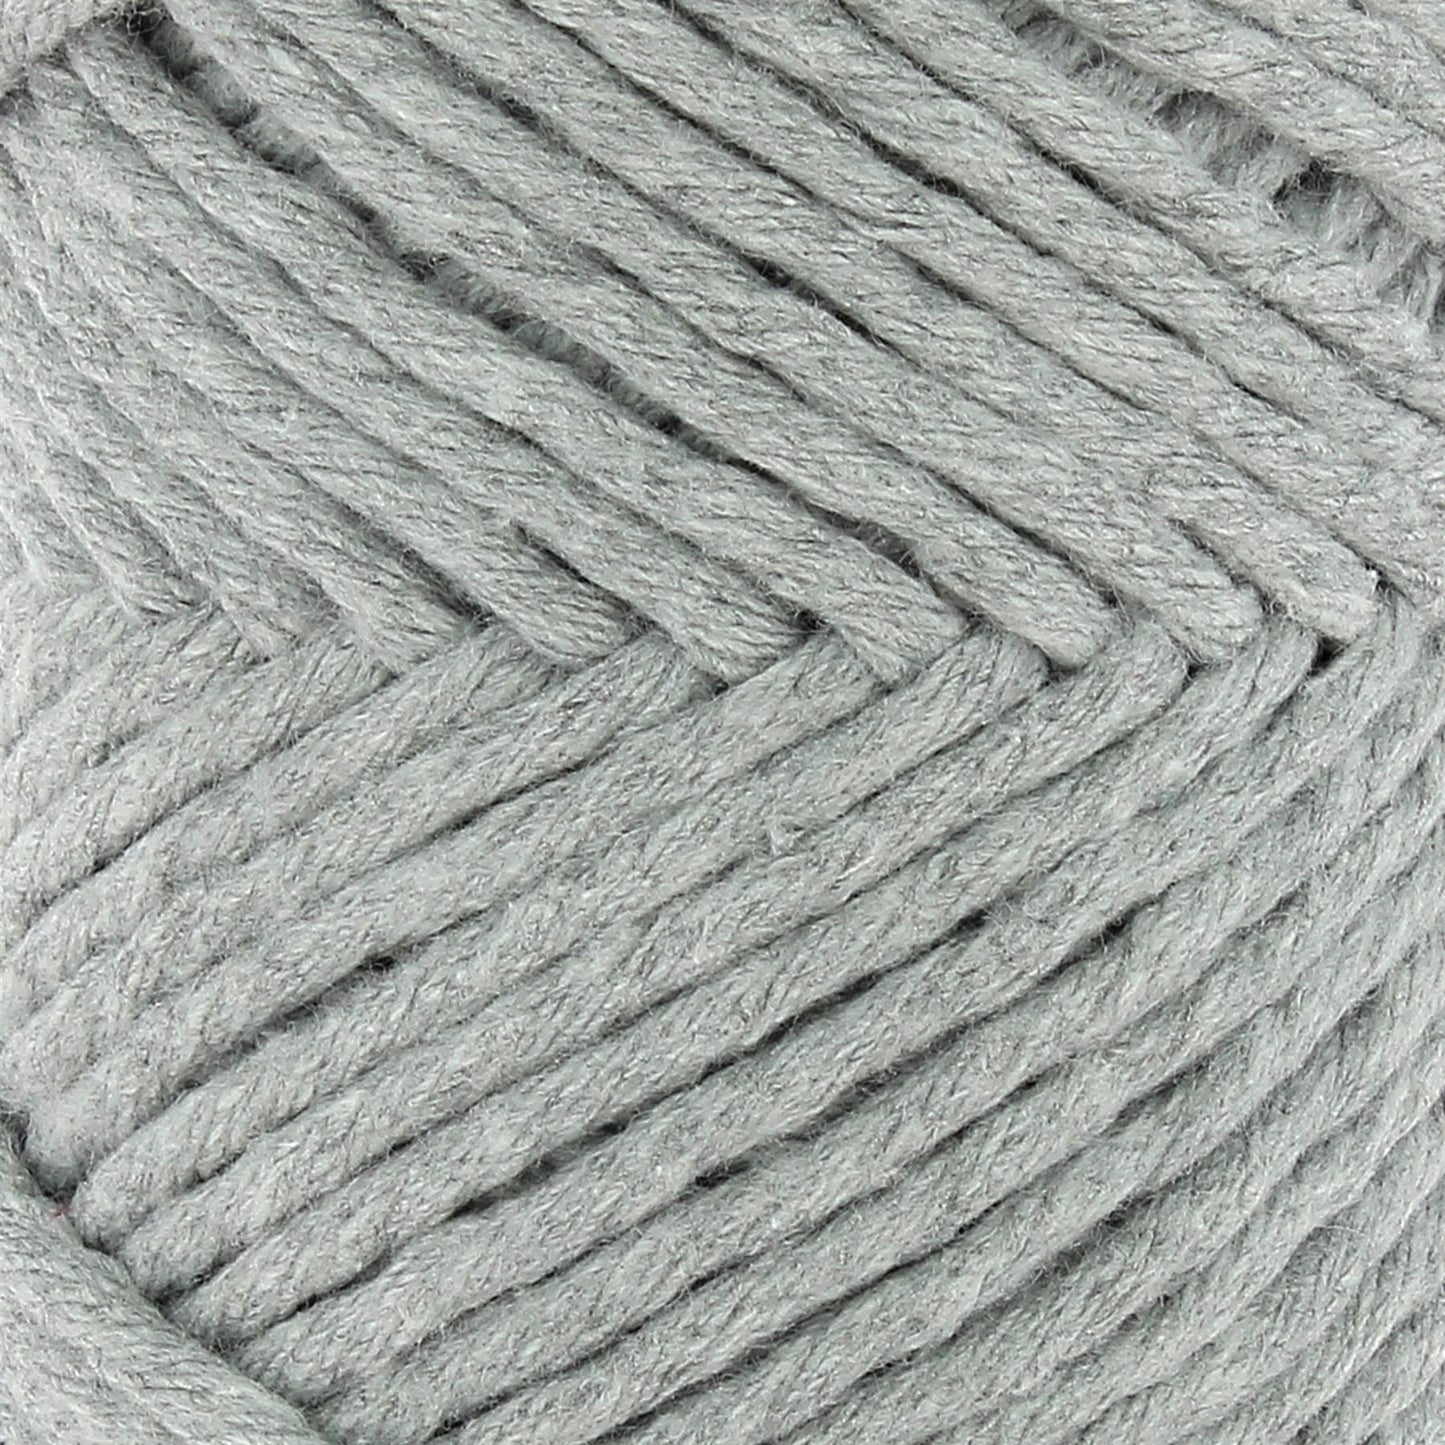 [Hoooked] S270200 Spesso Chunky Gris Cotton Yarn - 50M, 200g